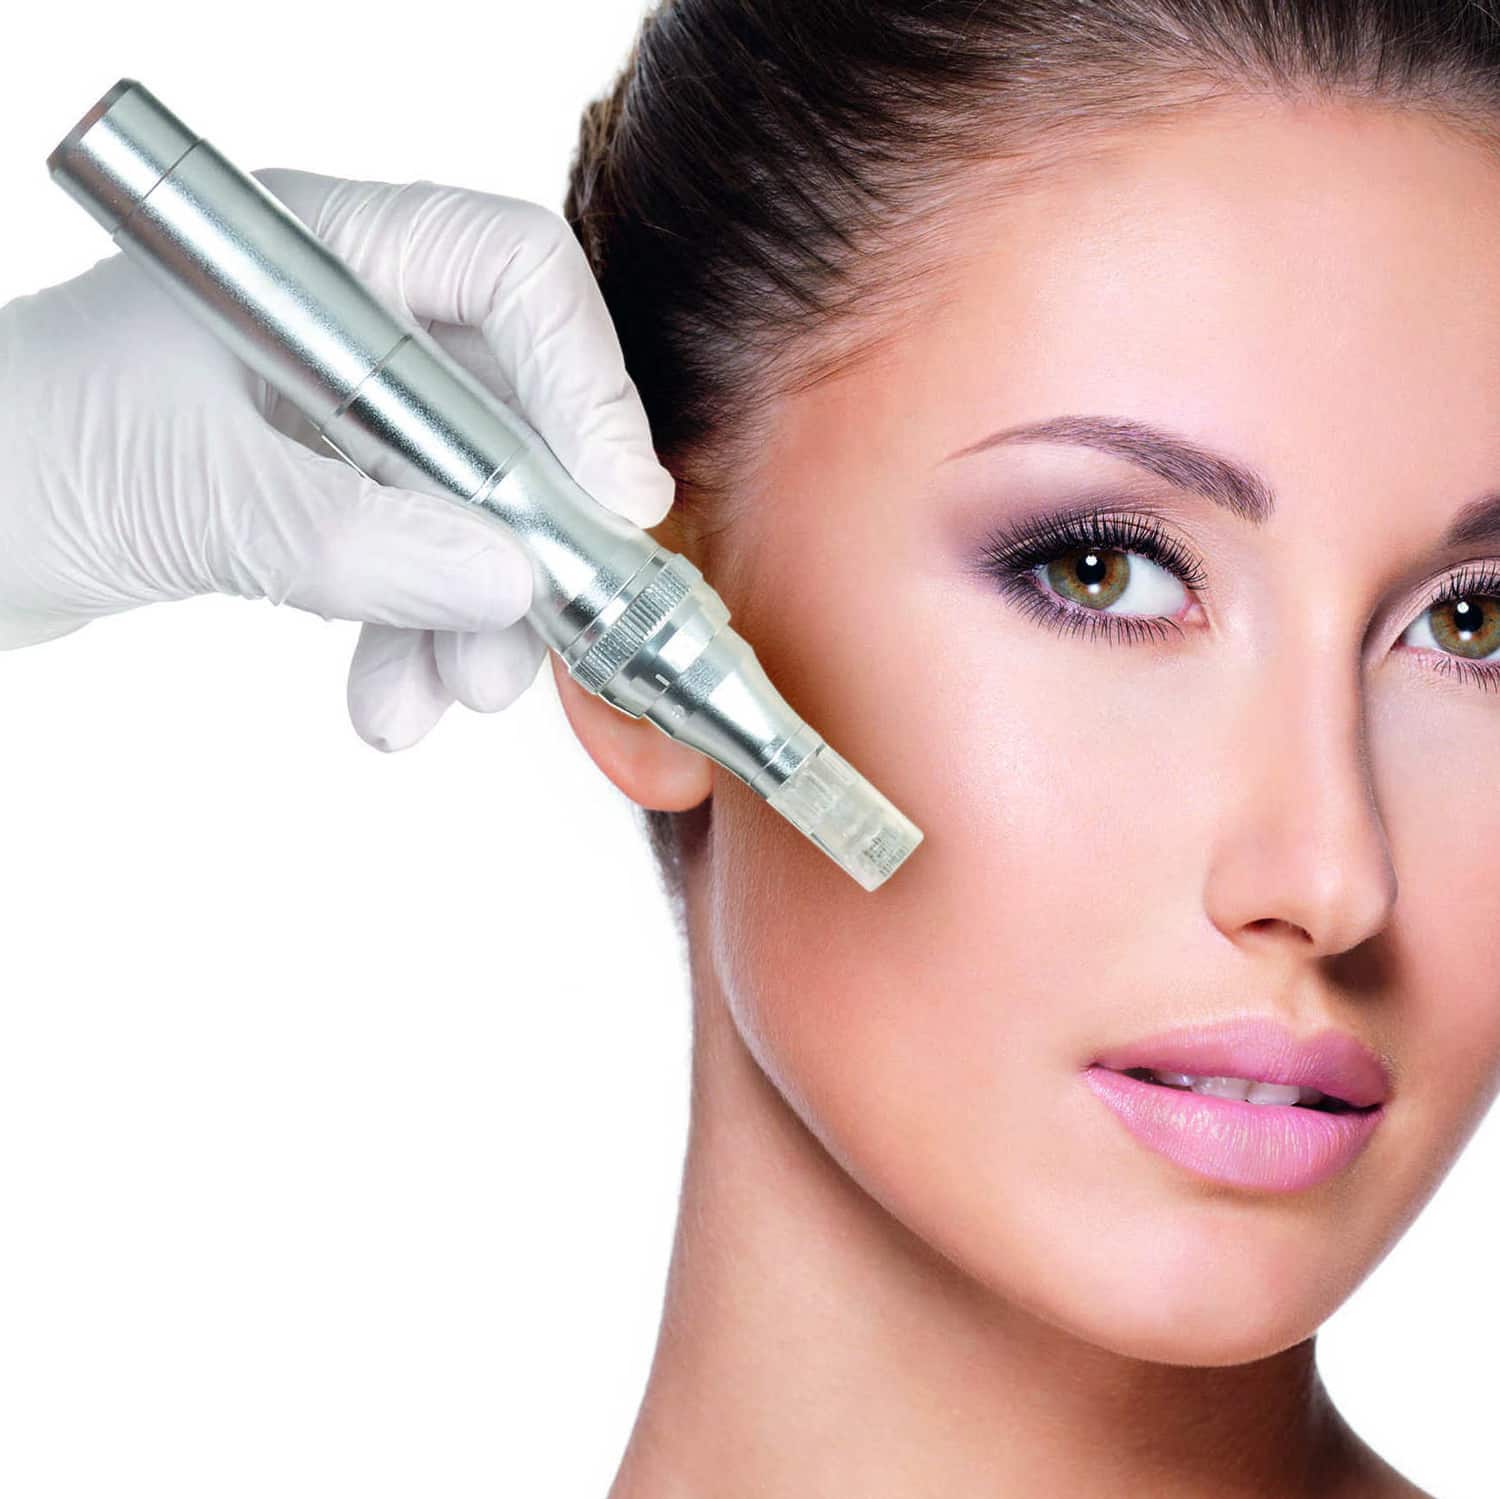 repair-renew-your-skin-with-micro-needling-timeless-skin-solutions